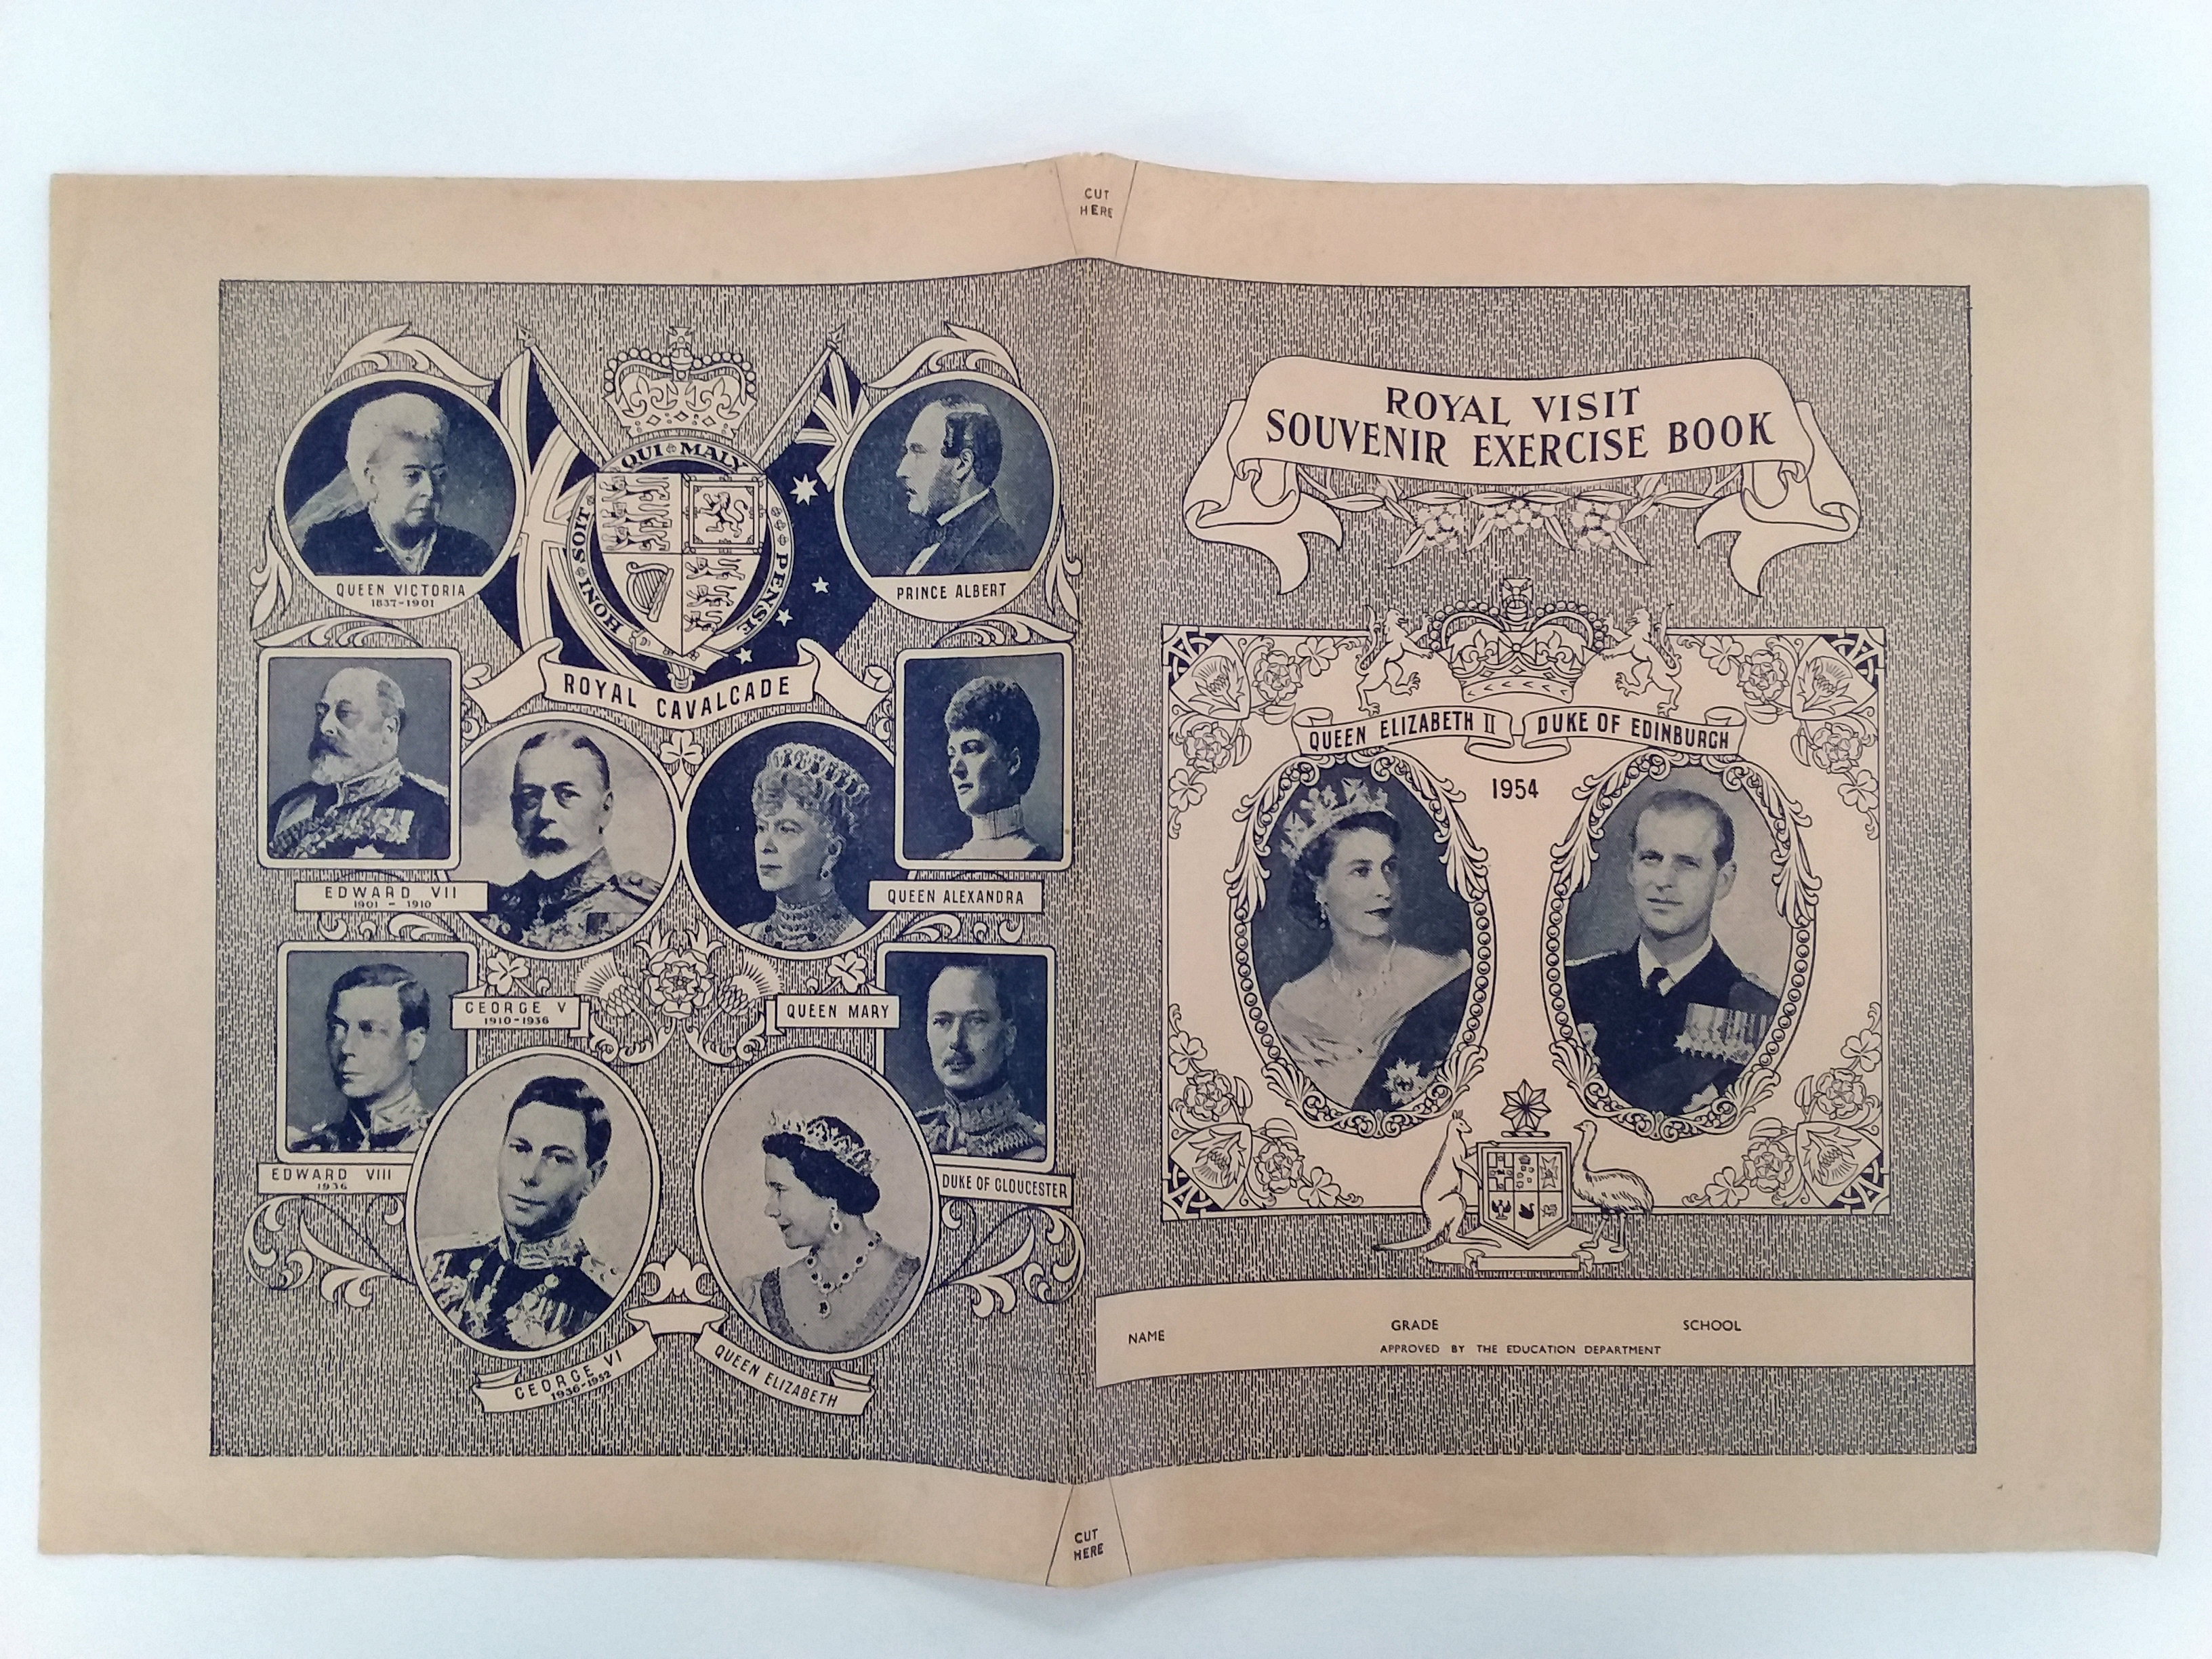 A school exercise book cover issued to children to commemorate the royal tour of 1954